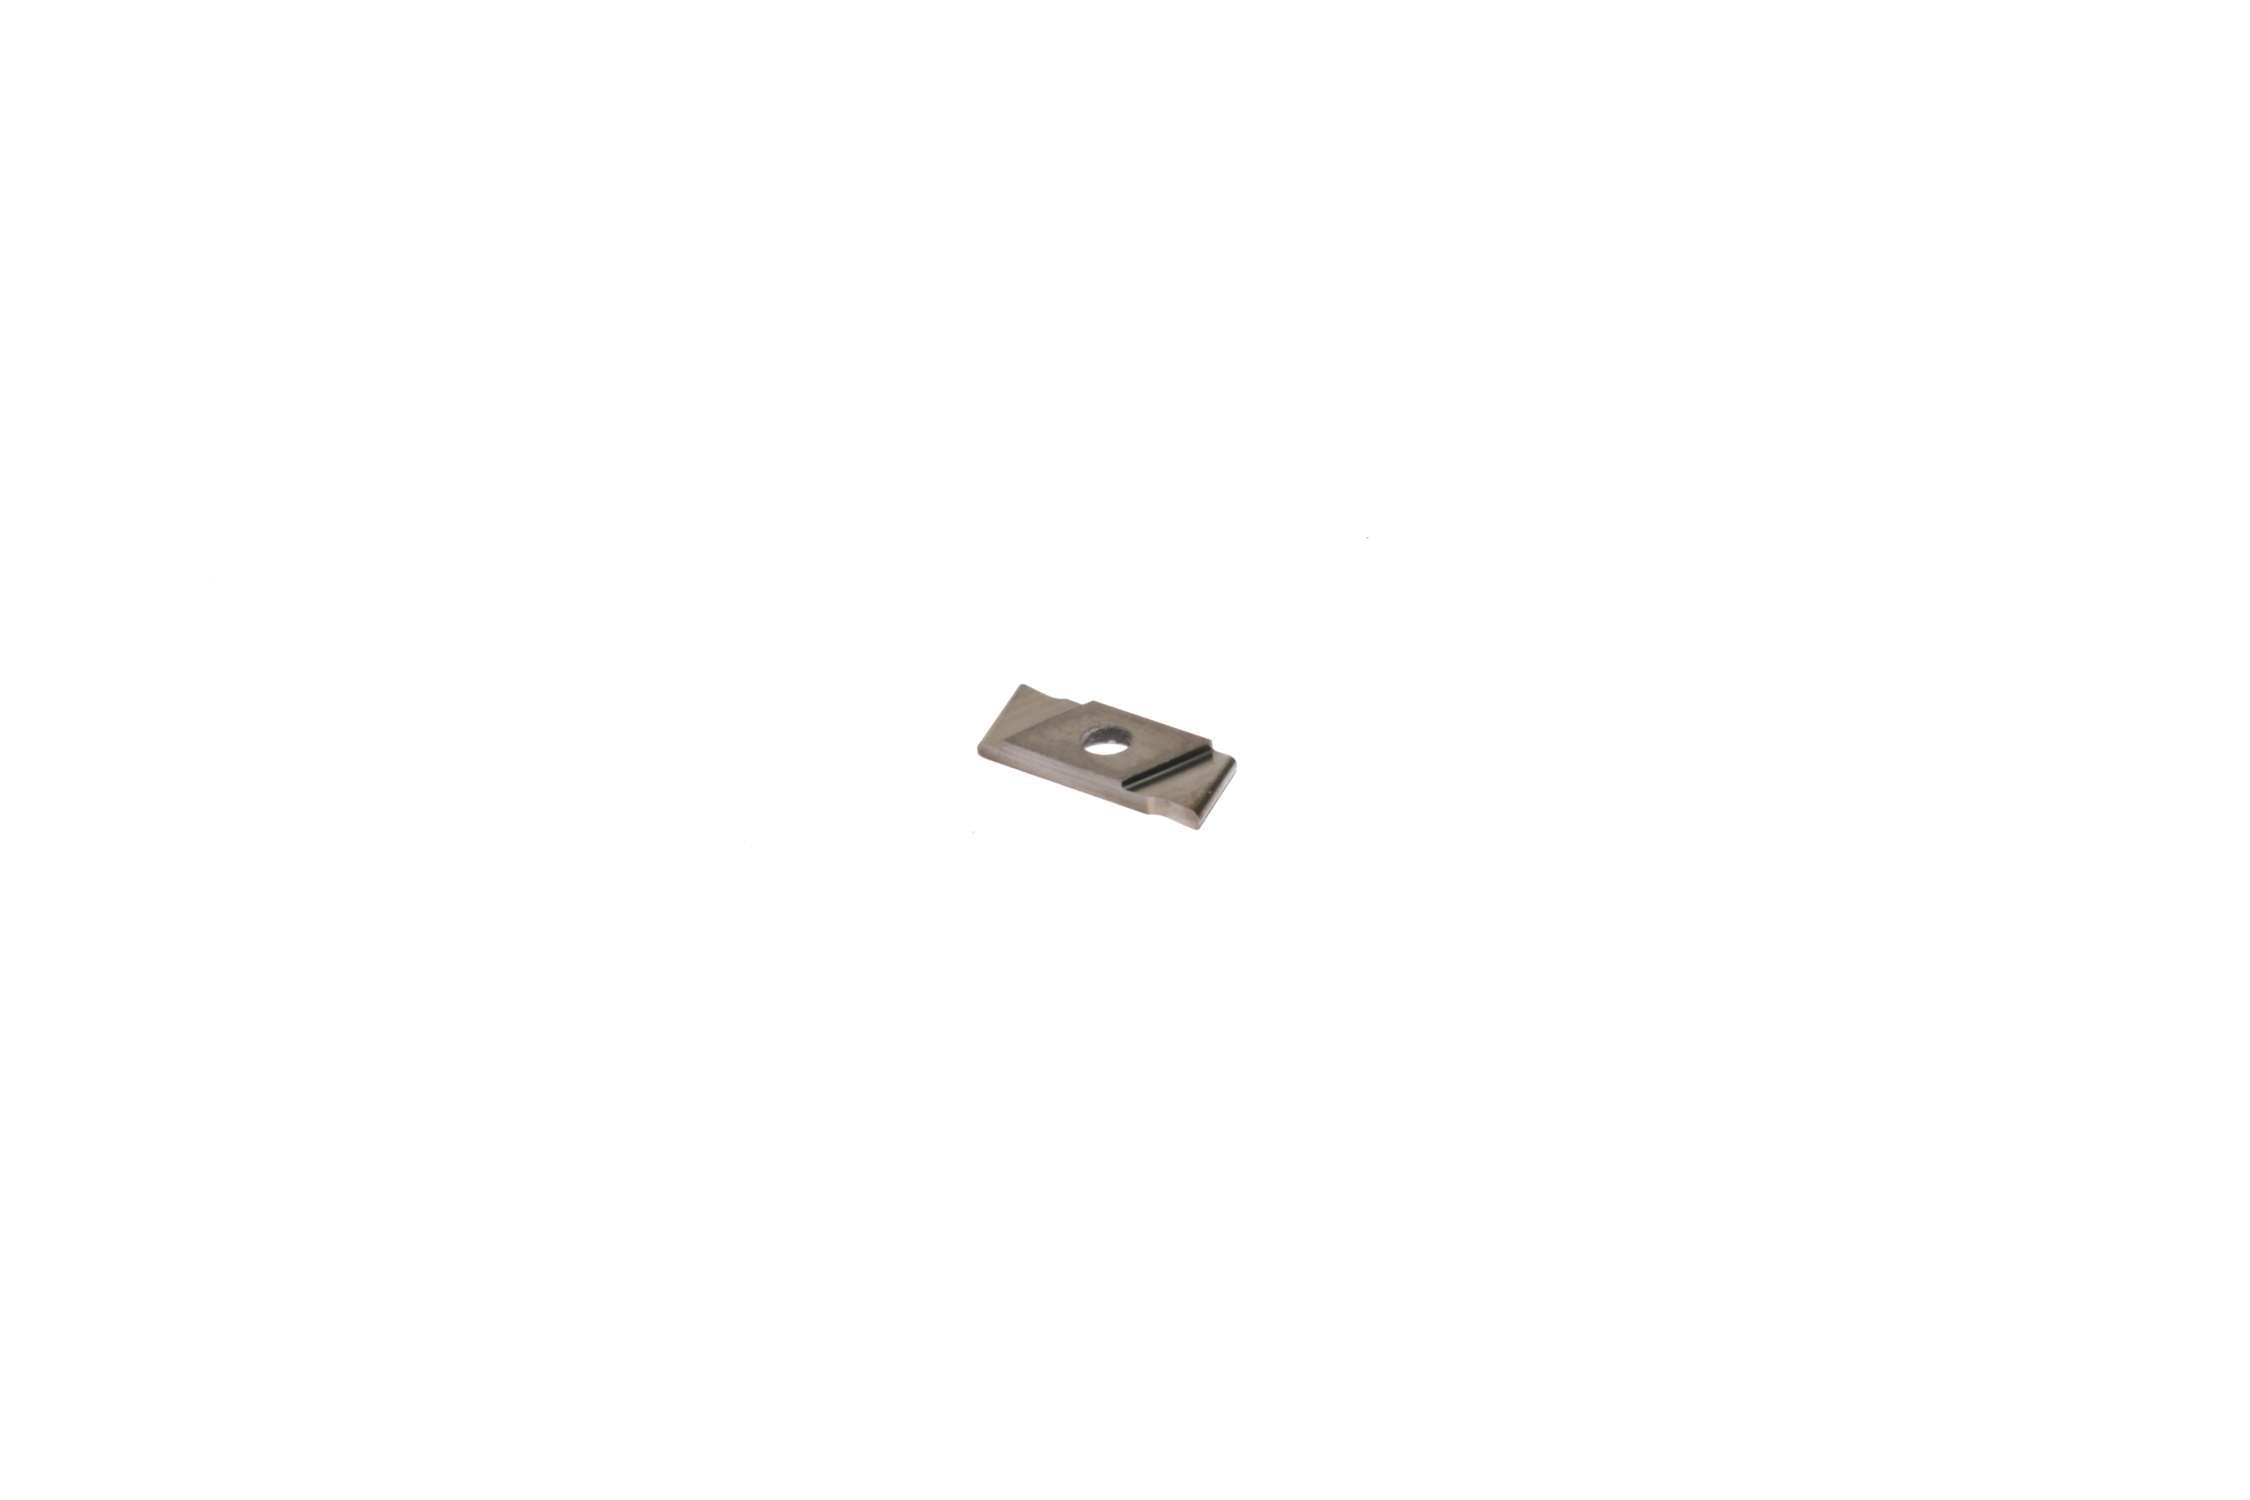 Competition Cams 5004I Carbide Insert for Lifter Bore Grooving Tool